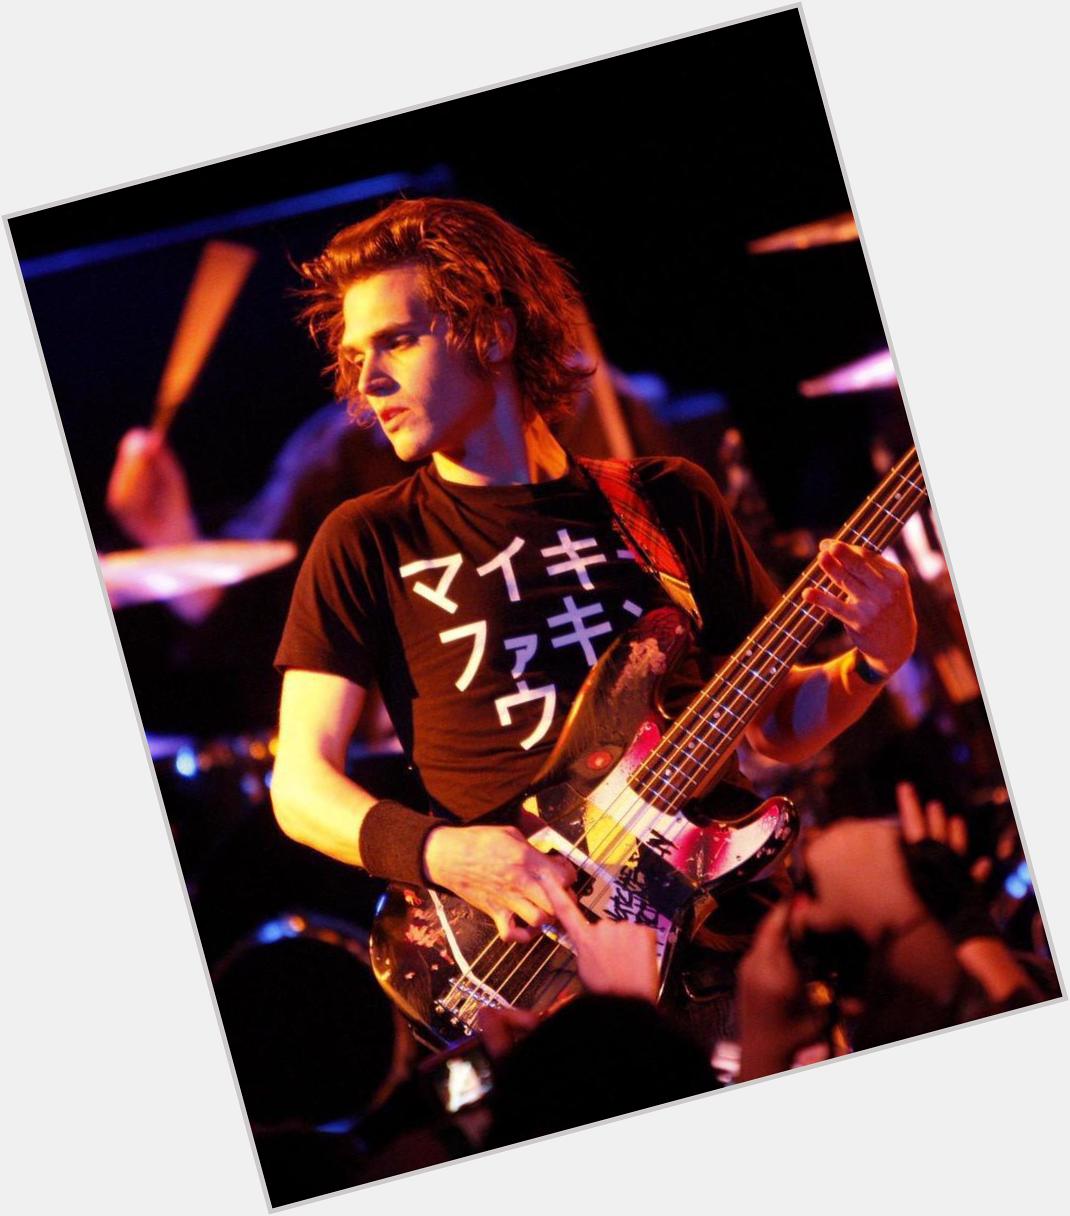 N before I forget happy 35th birthday to Mikey way! !! 